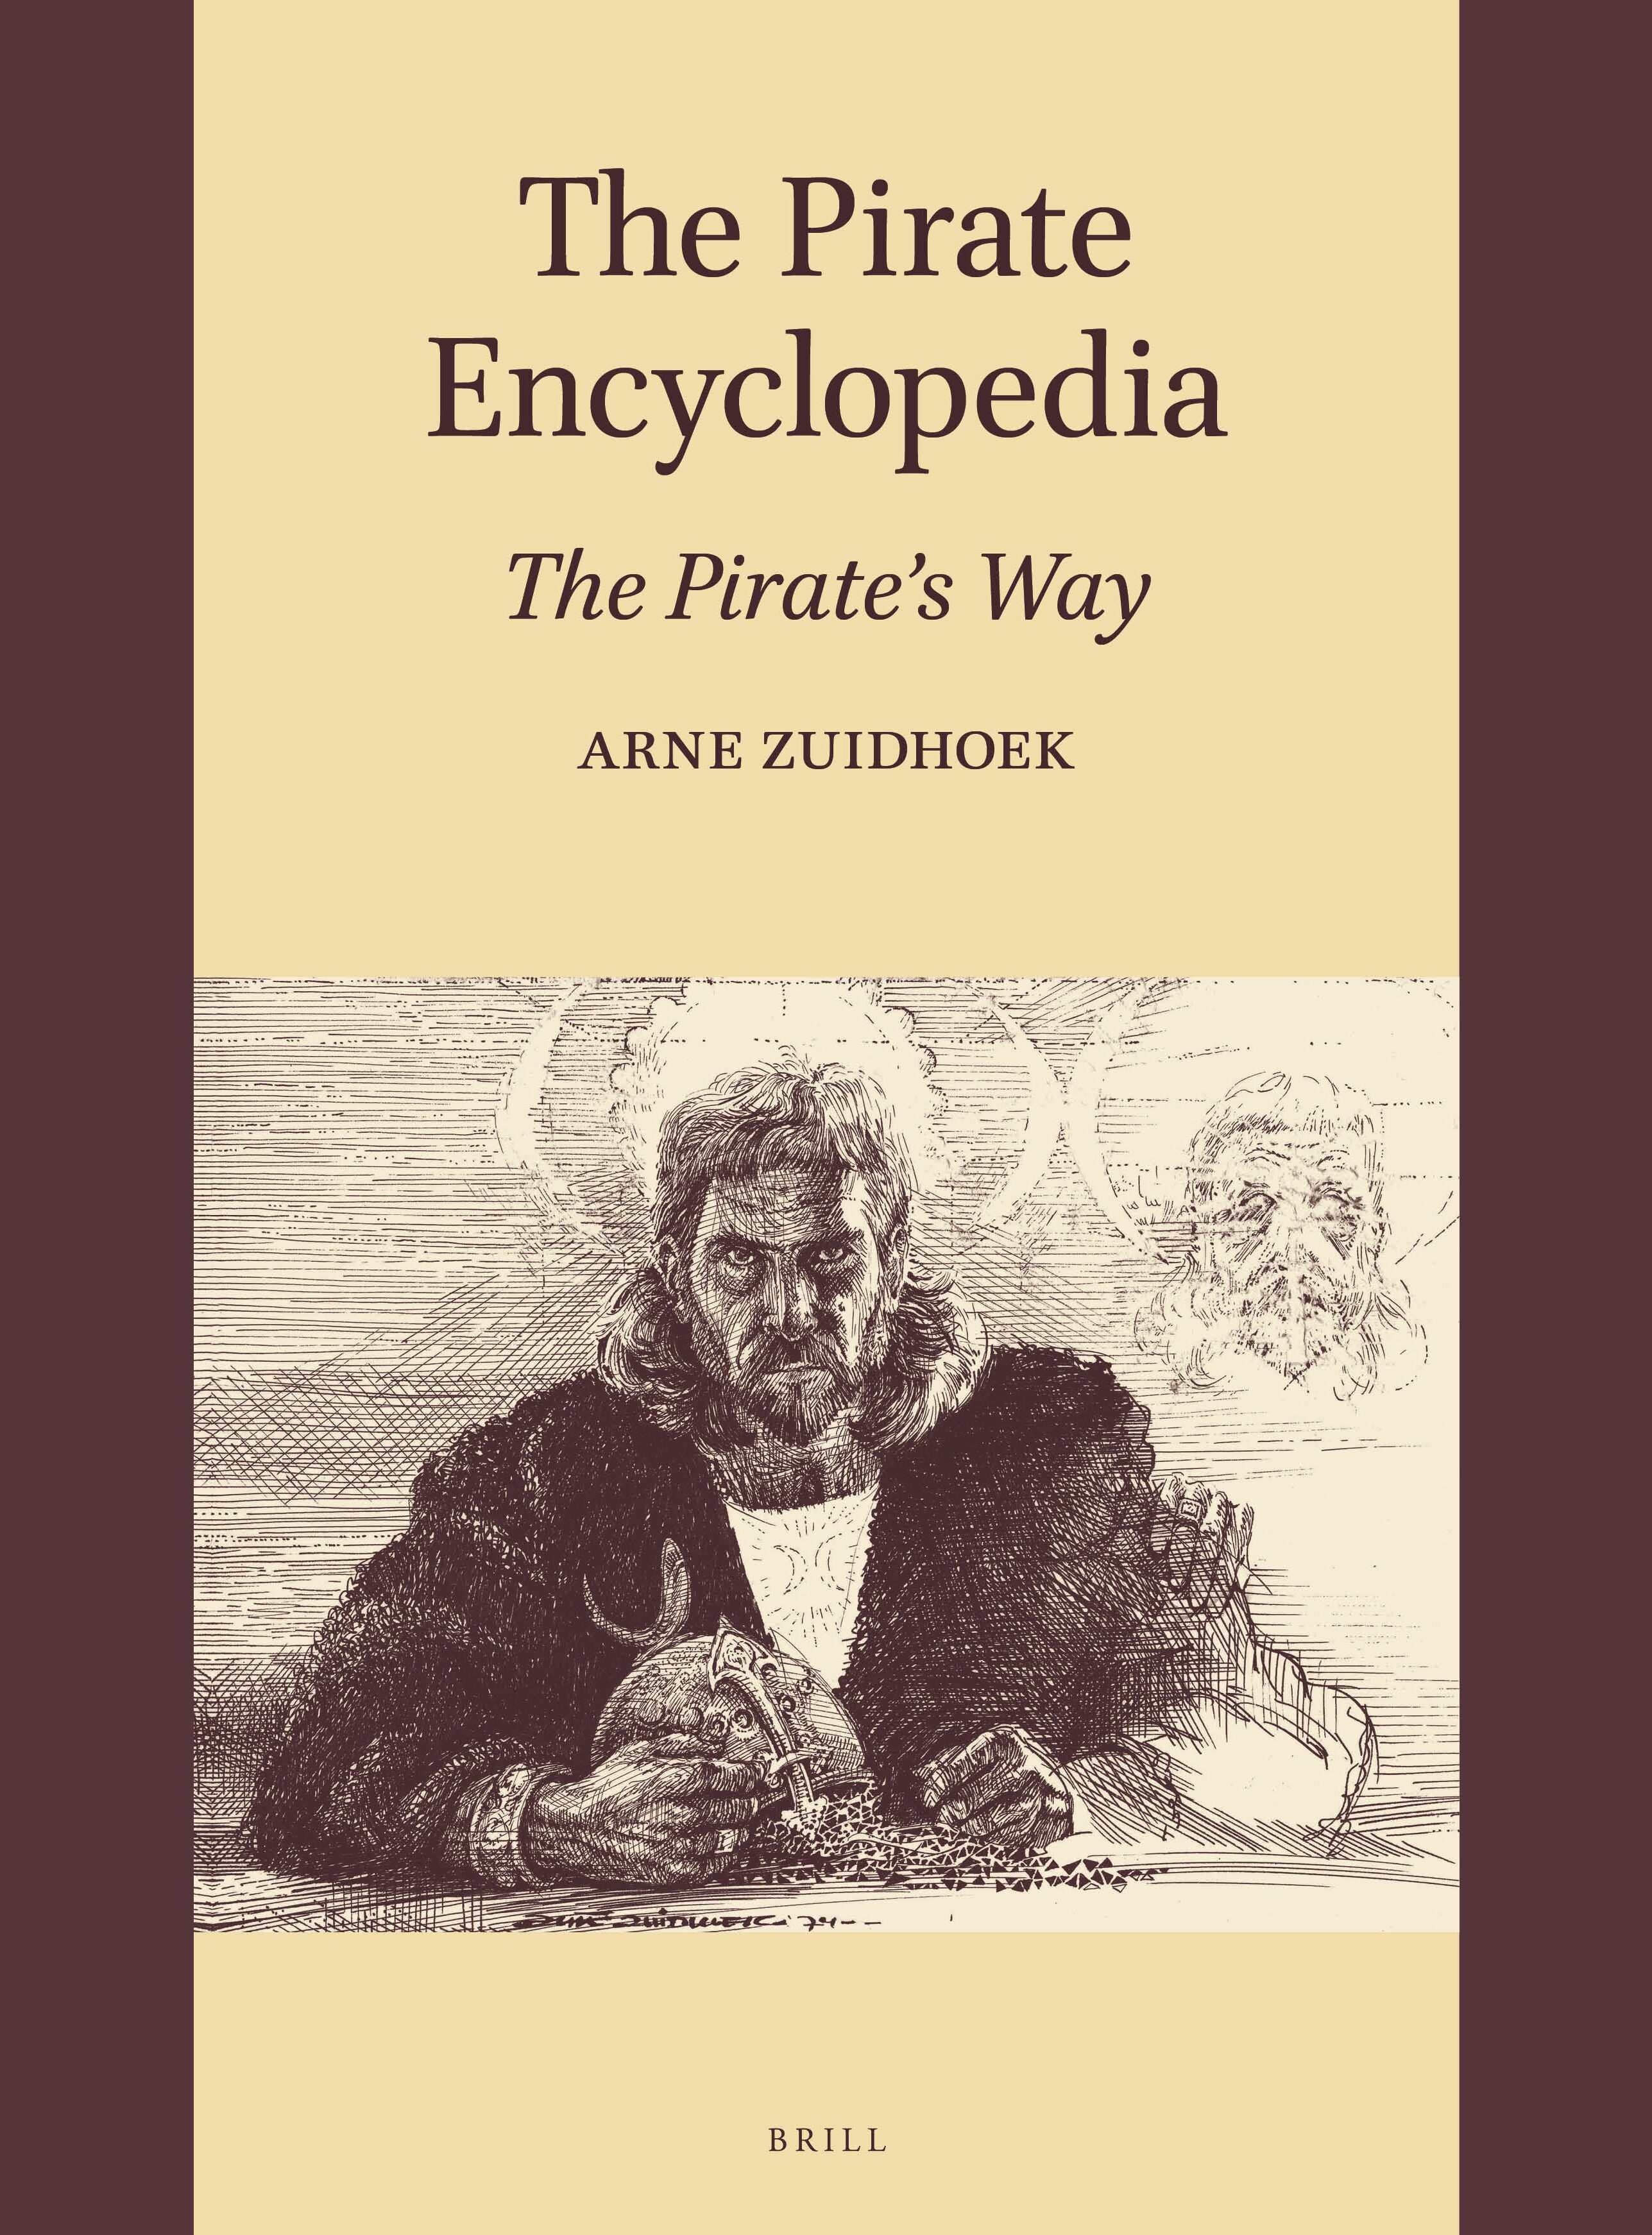 B in: The Pirate Encyclopedia